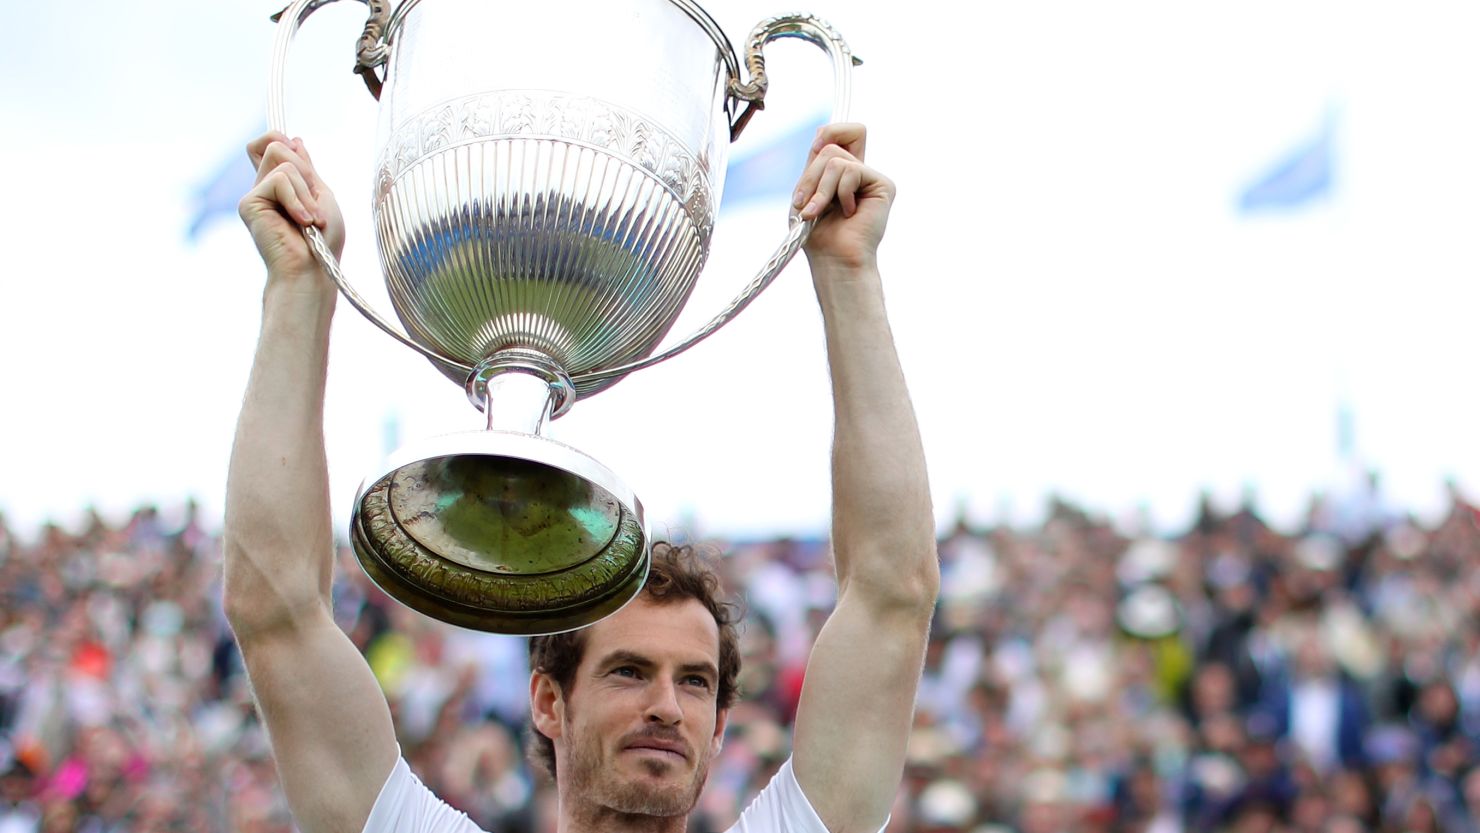 Just champion: Andy Murray lifts the famous Queen's Club trophy for a record fifth time. 